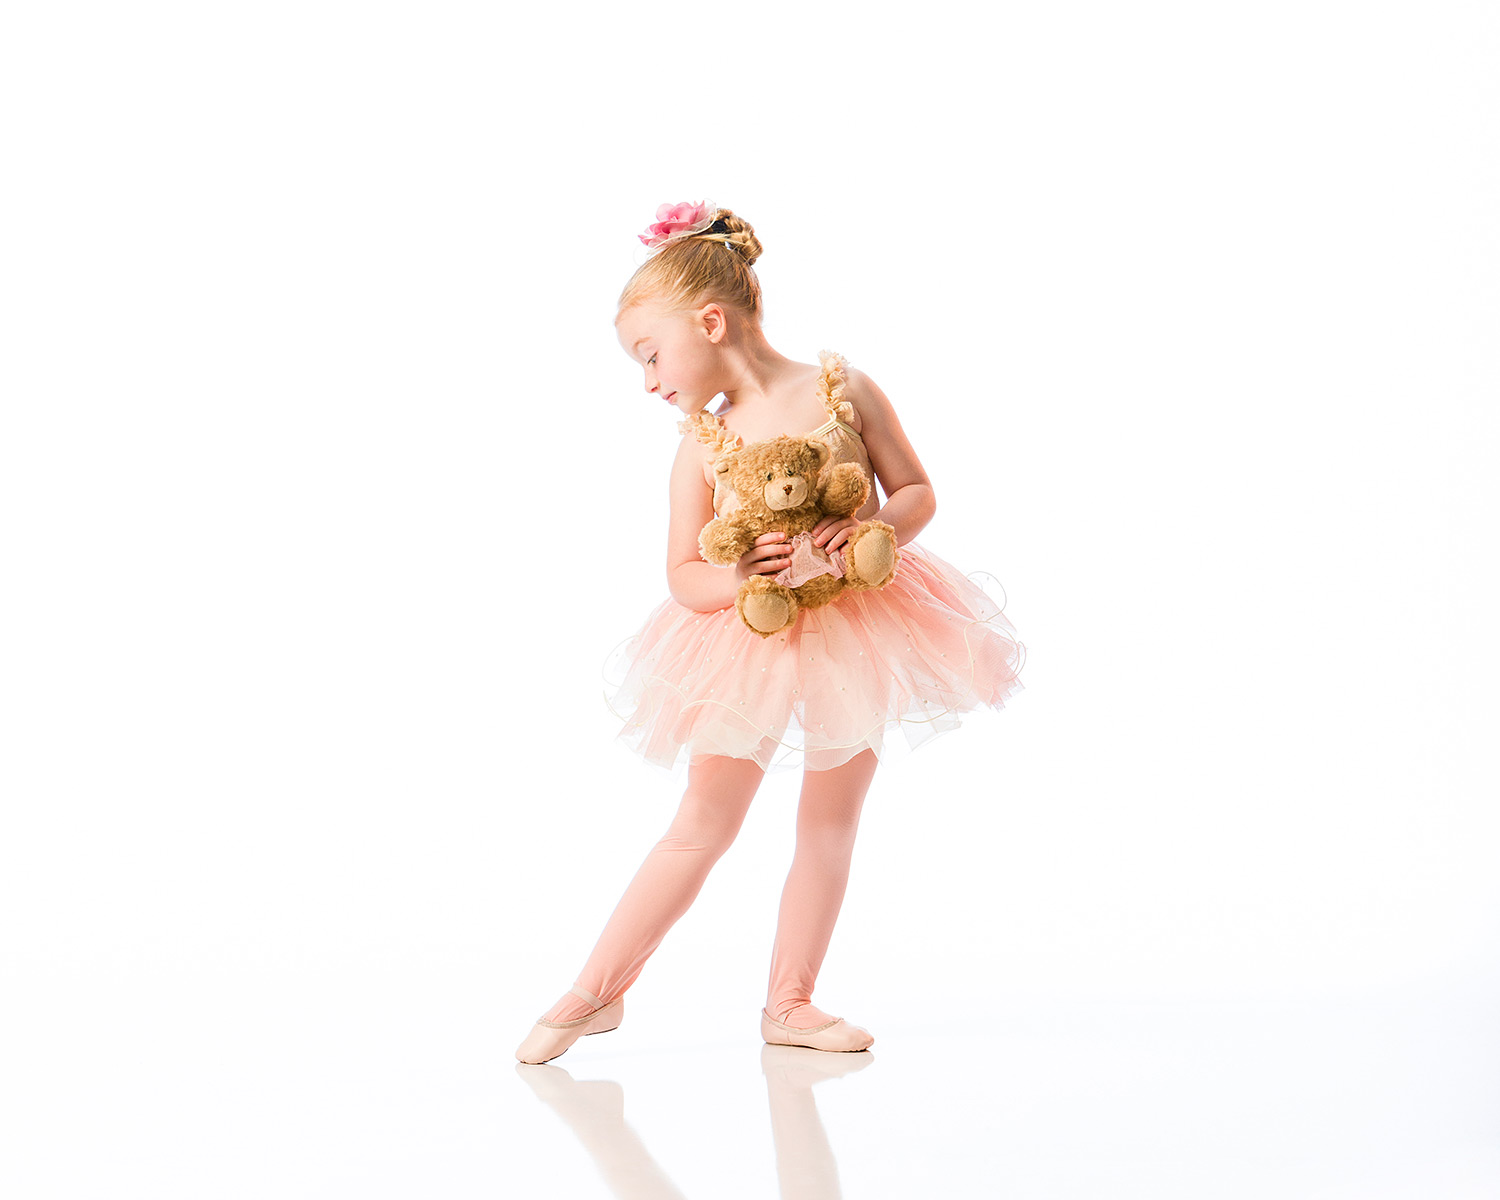 A young ballerina in a tutu points her toe. Sharon Davis School of Dance is now offering online/virtual dance classes.